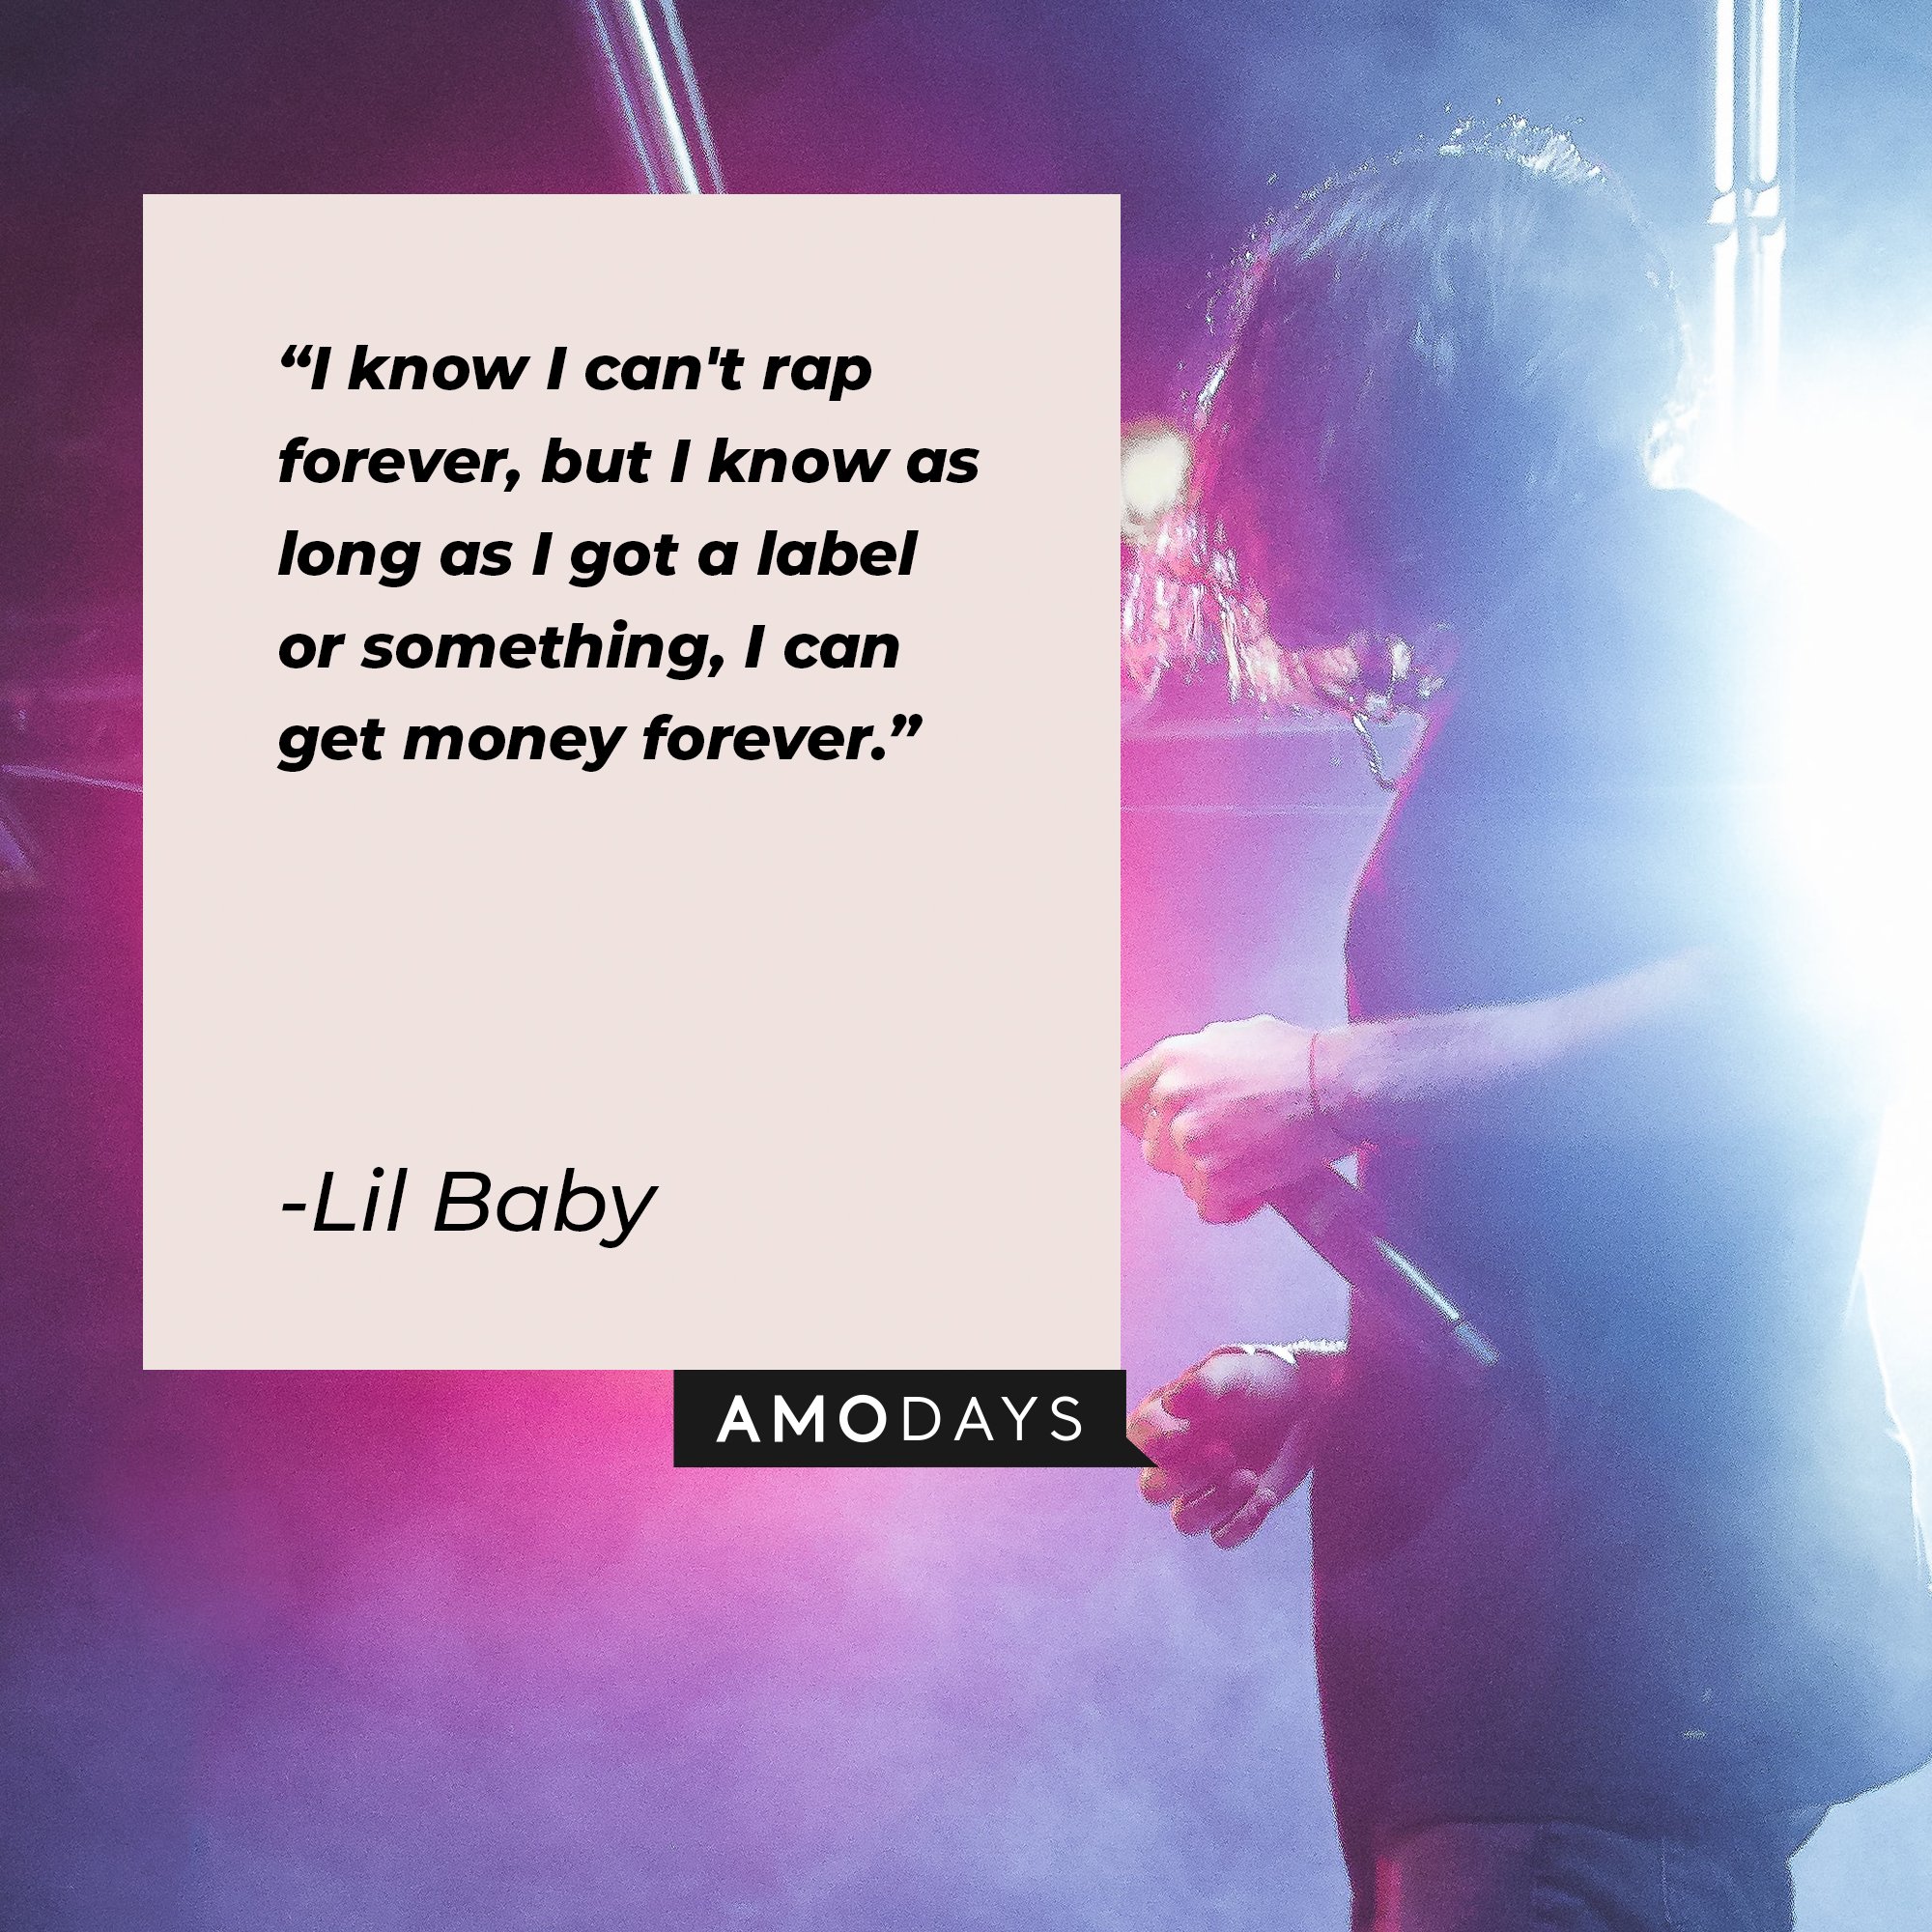 Lil Baby’s quote: "I know I can't rap forever, but I know as long as I got a label or something, I can get money forever." | Image: AmoDays